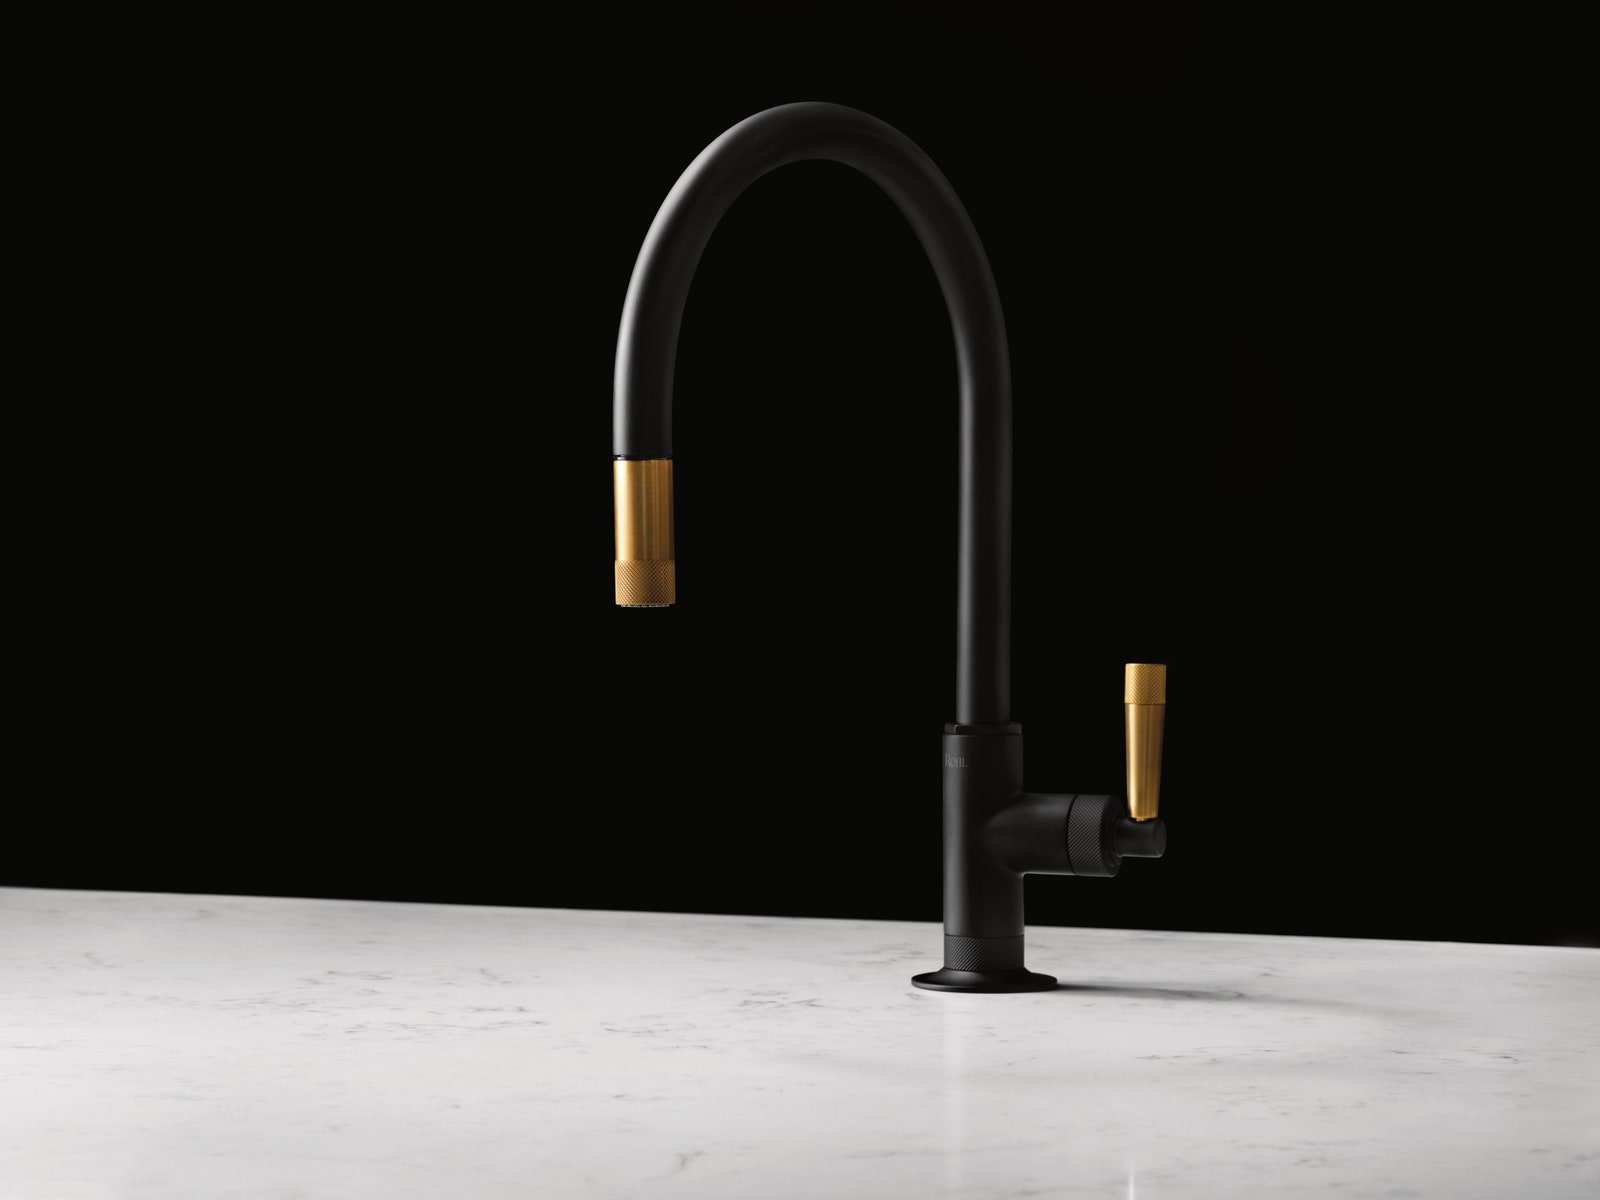 Rohl Faucet